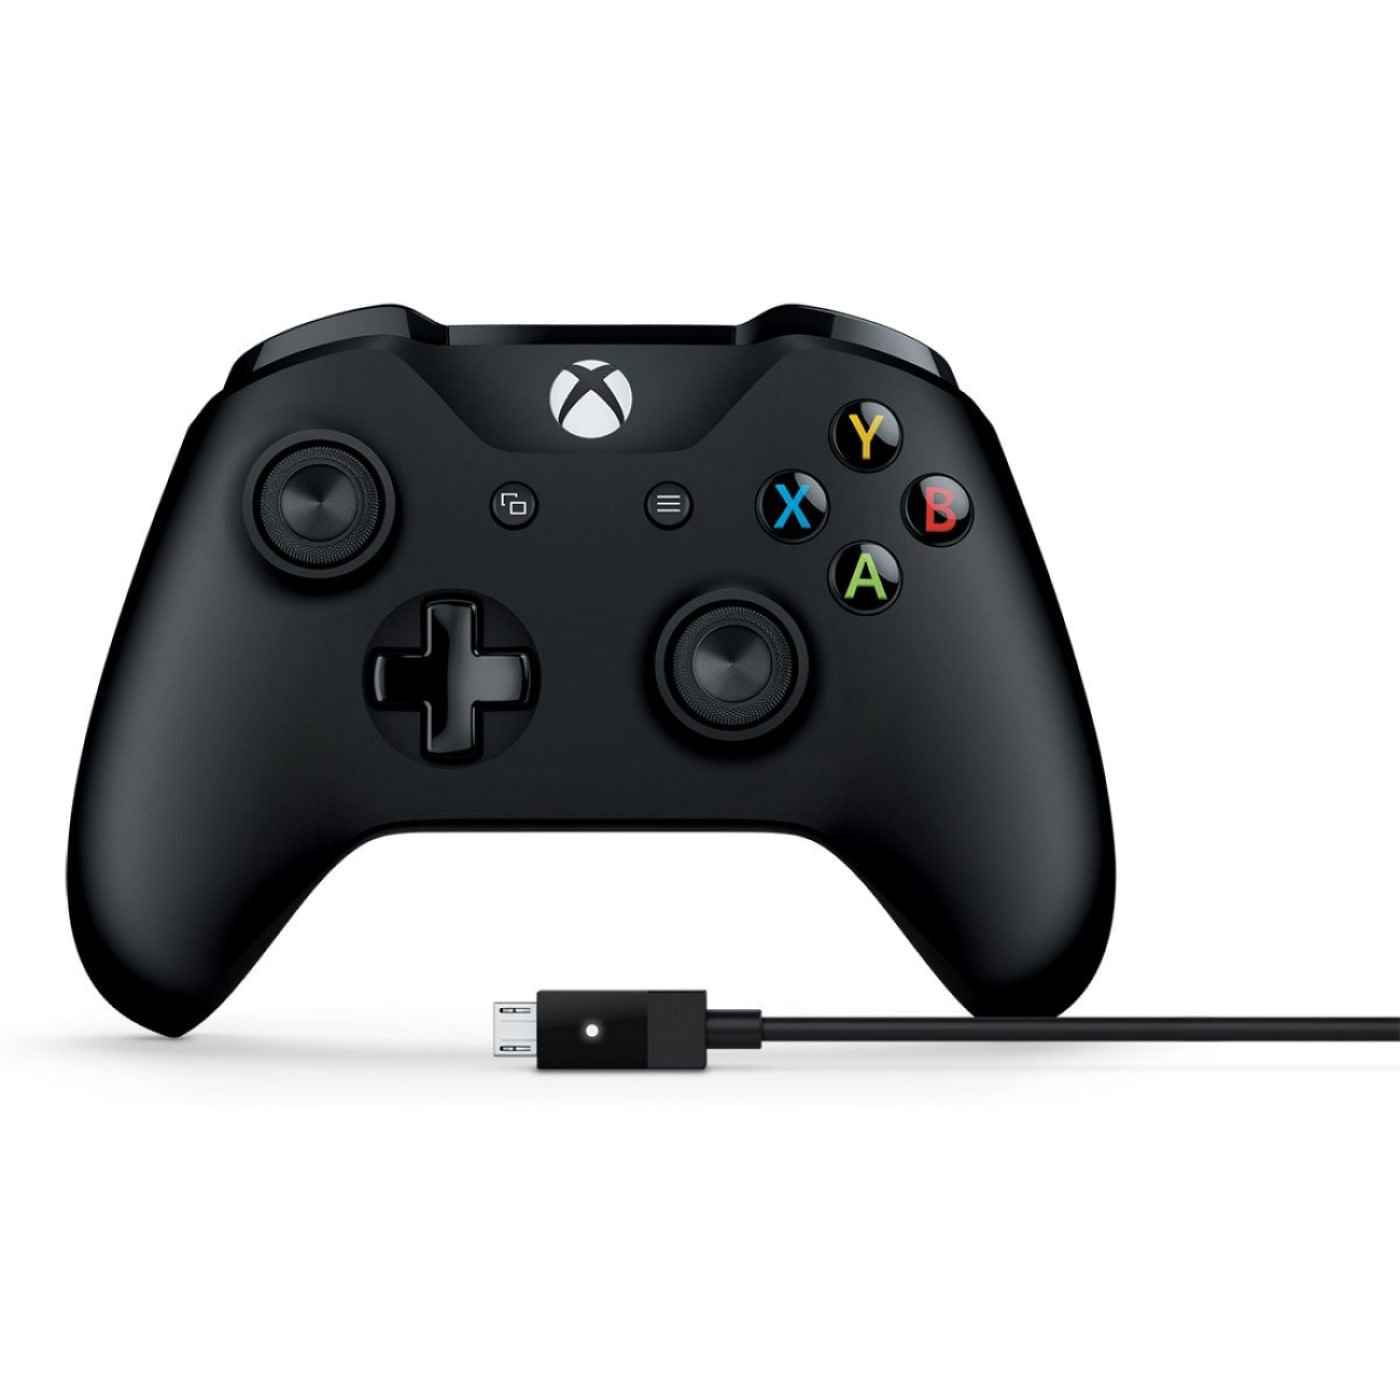 Microsoft Xbox One Wireless Mando Gamer inalámbrico Black + Cable for Windows - 4N6-00001